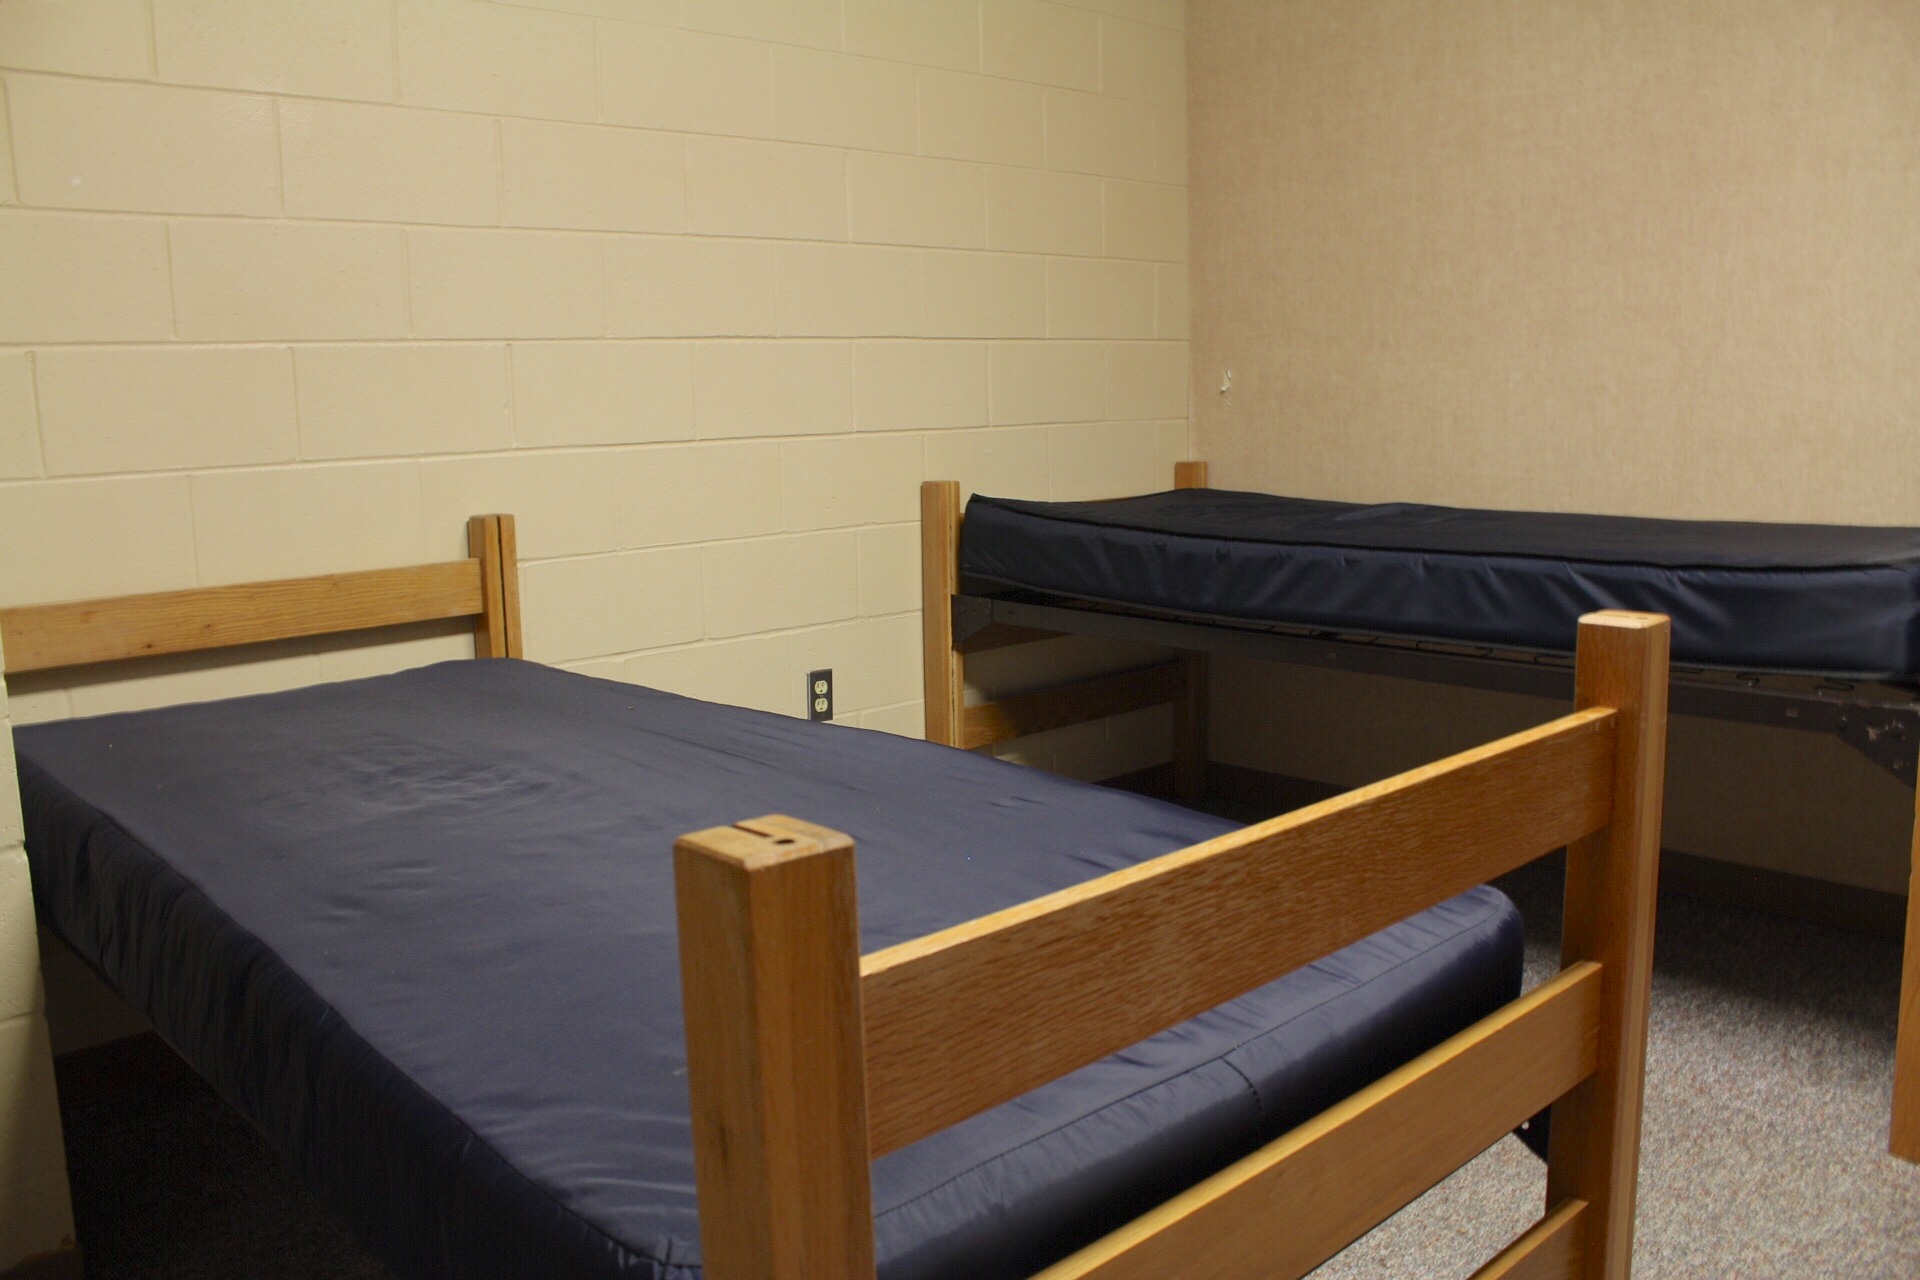 Centennial Complex room with 2 bed frames and mattresses.